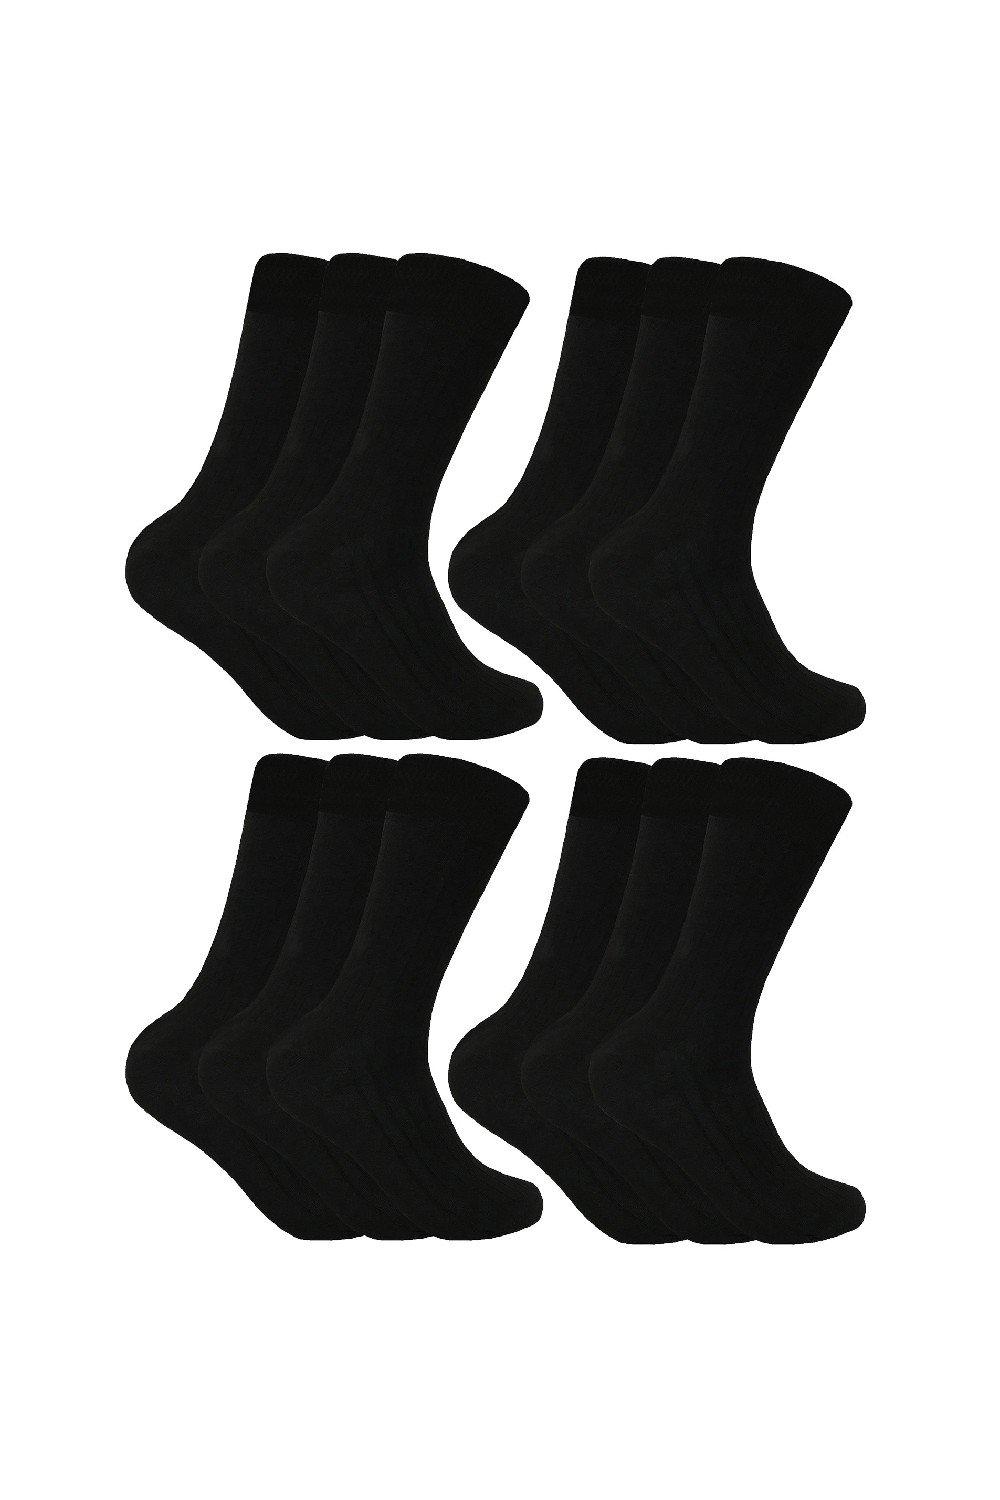 12 Pairs Wool Boot Socks for Hiking